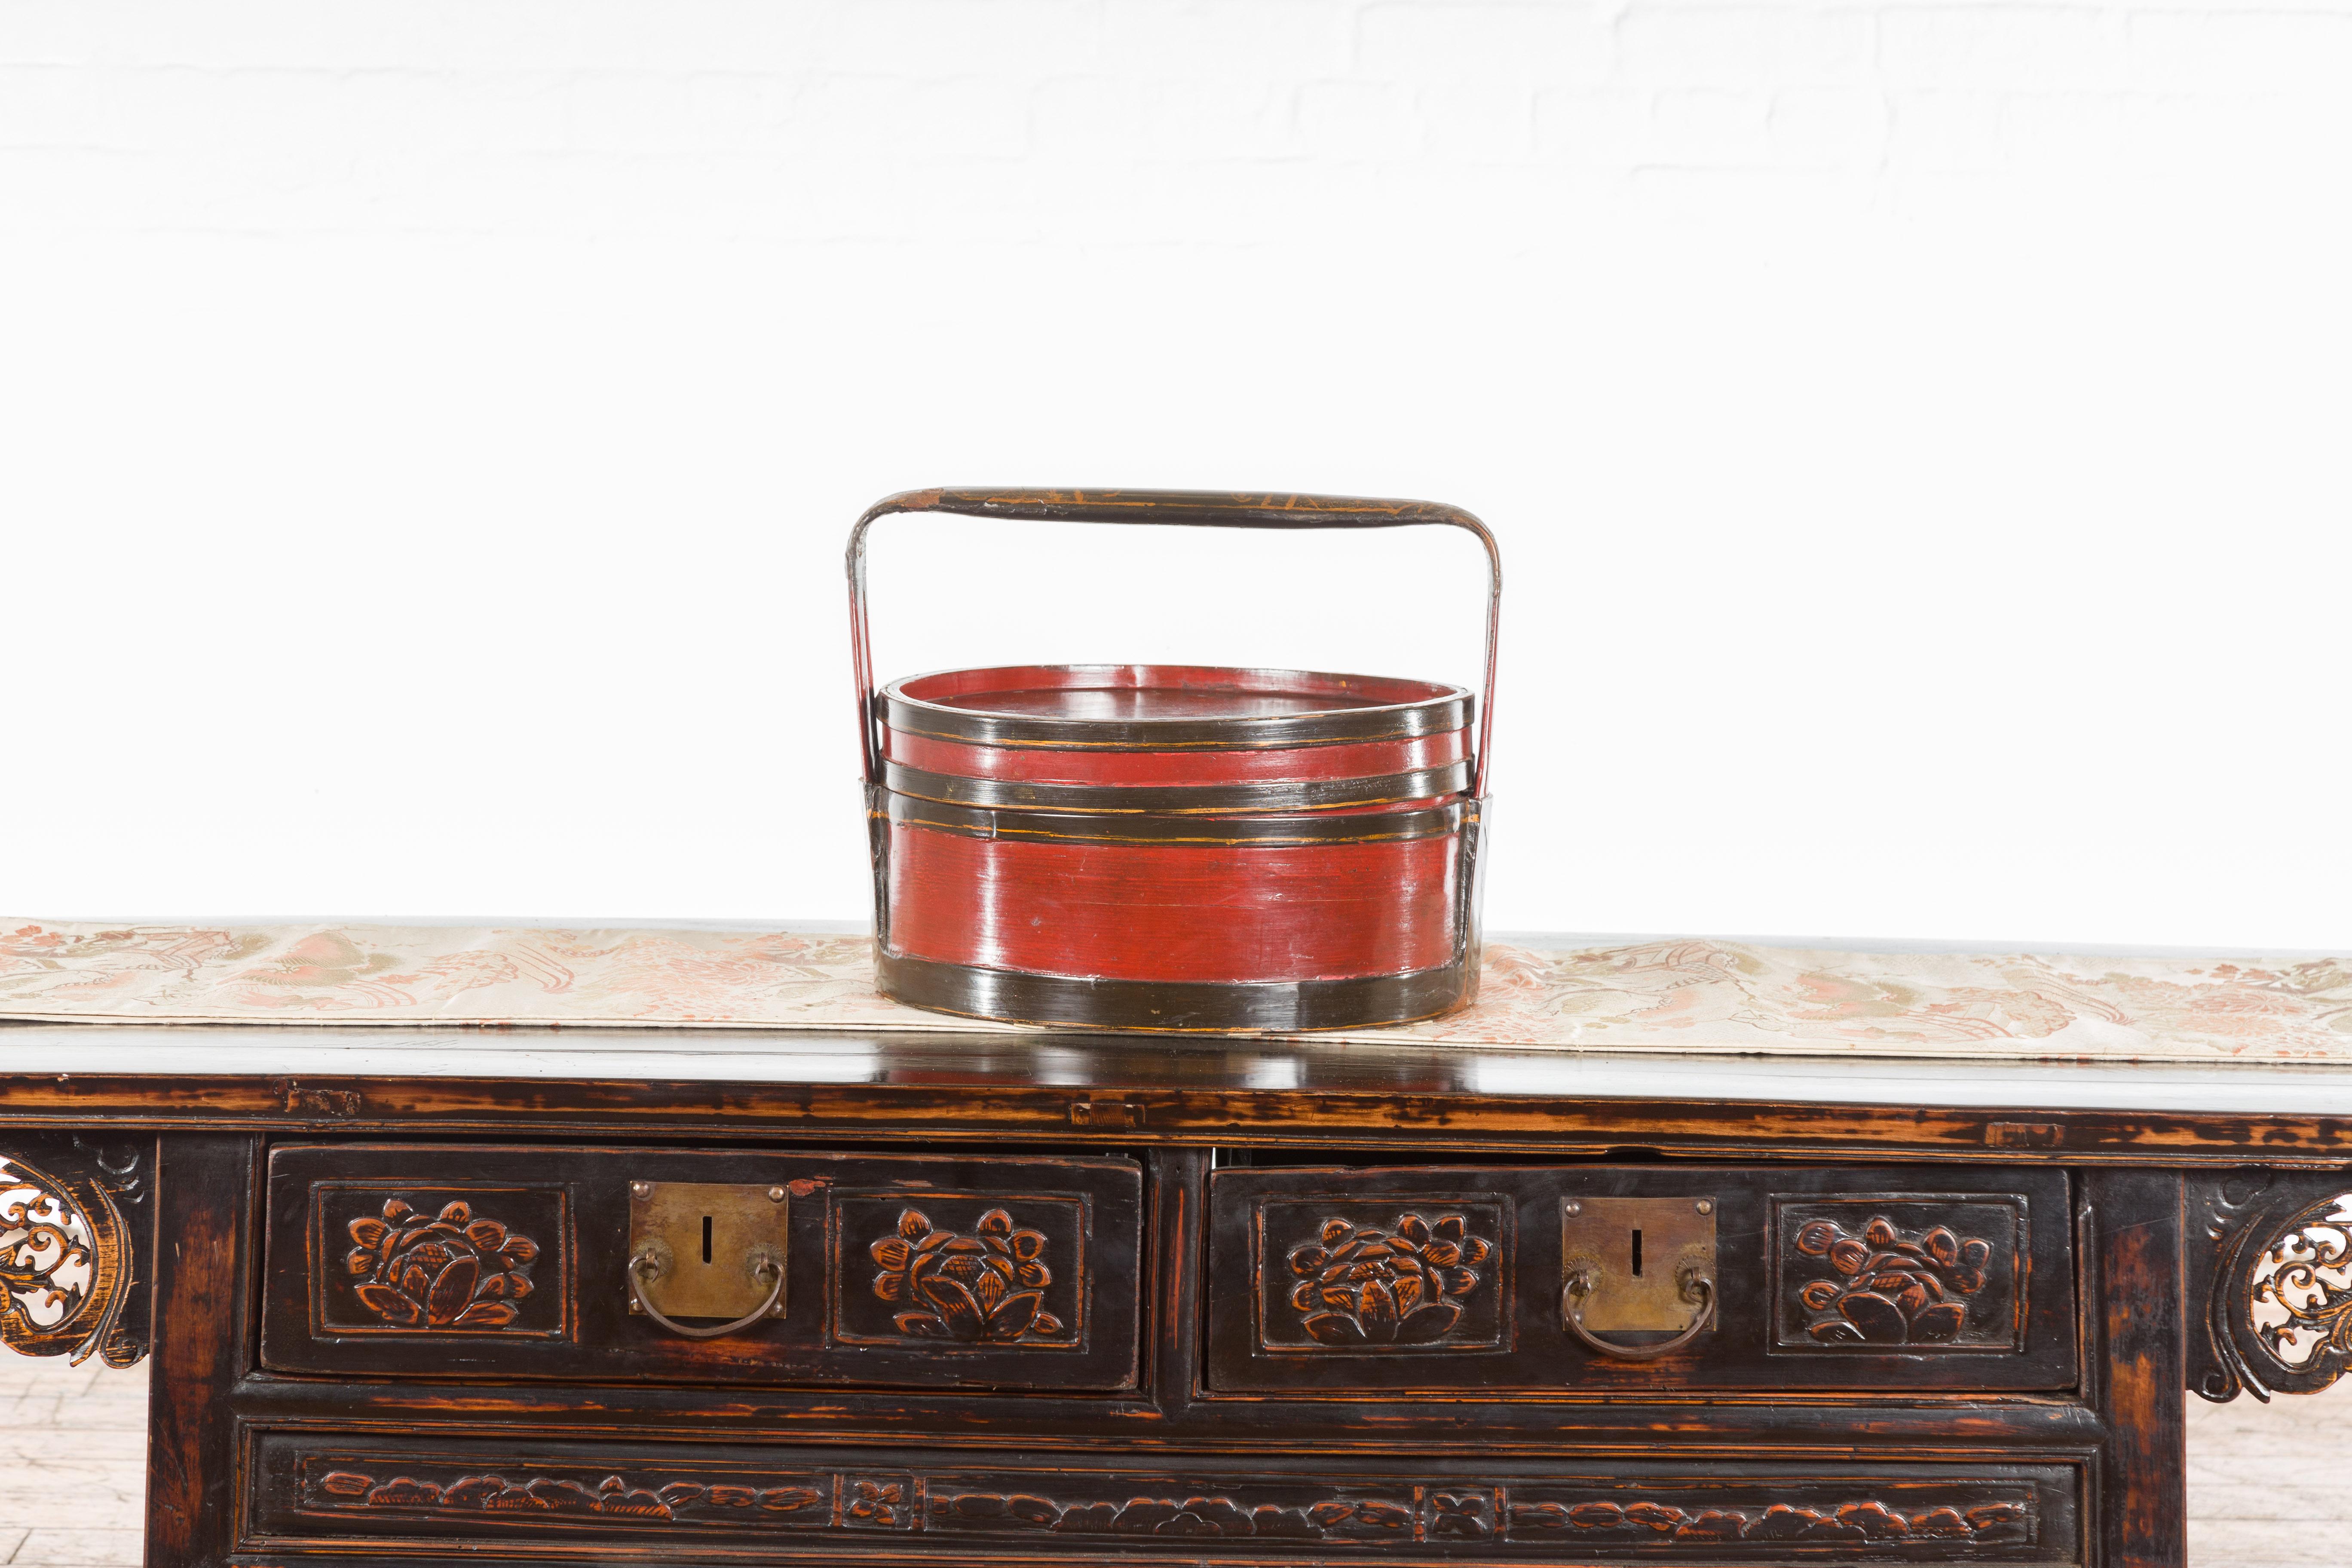 A Chinese vintage black and red lacquer picnic basket from the mid 20th century, with gilt Chinoiserie décor. Created in China during the midcentury period, this red and black lacquer picnic basket draws our attention with its circular lid adorned